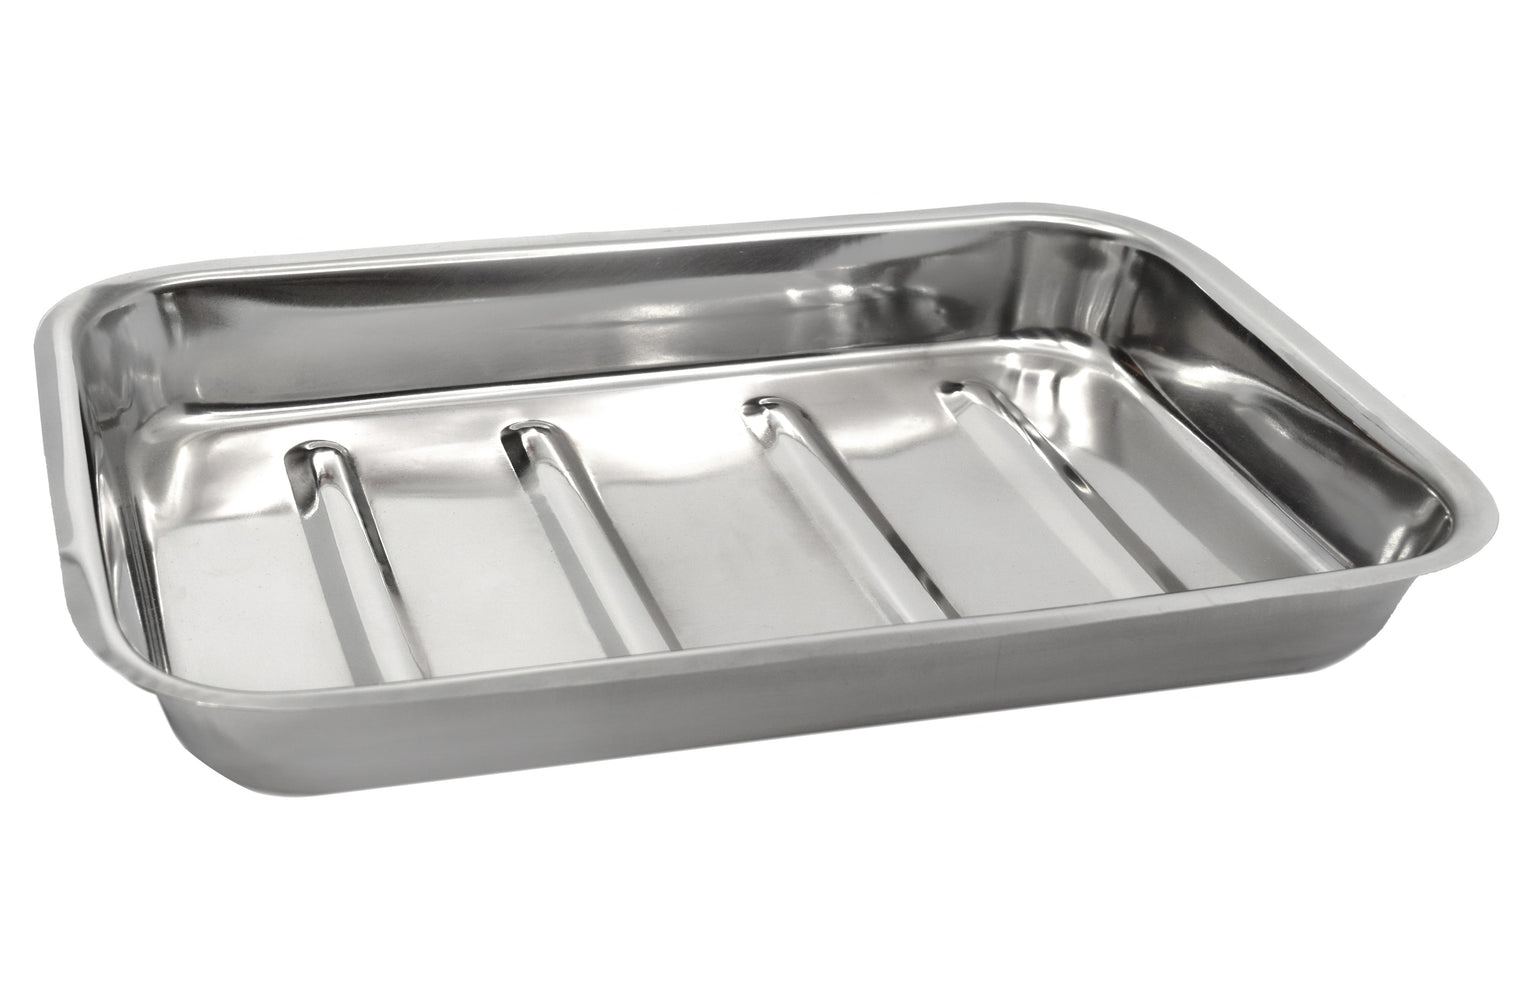 Dissection Tray, 15" x 12" - High Quality Stainless Steel - No Wax Liner - Eisco Labs